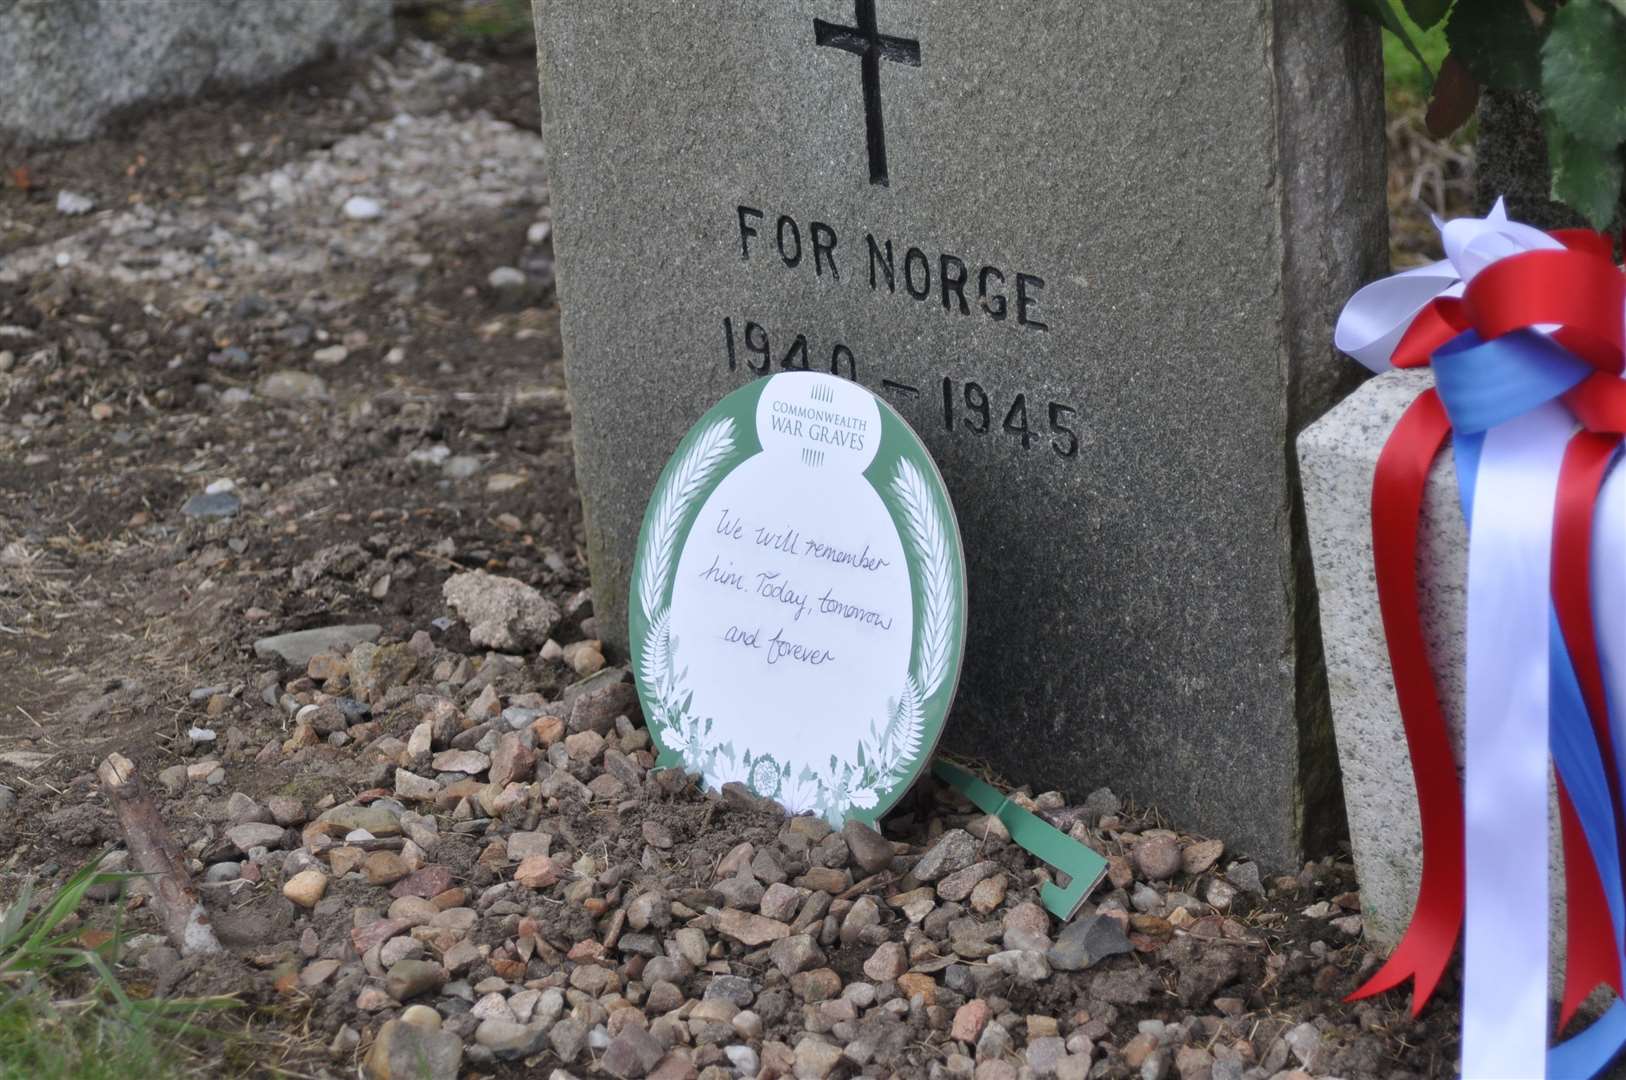 A note at the graveside of Birger Bratsberg.